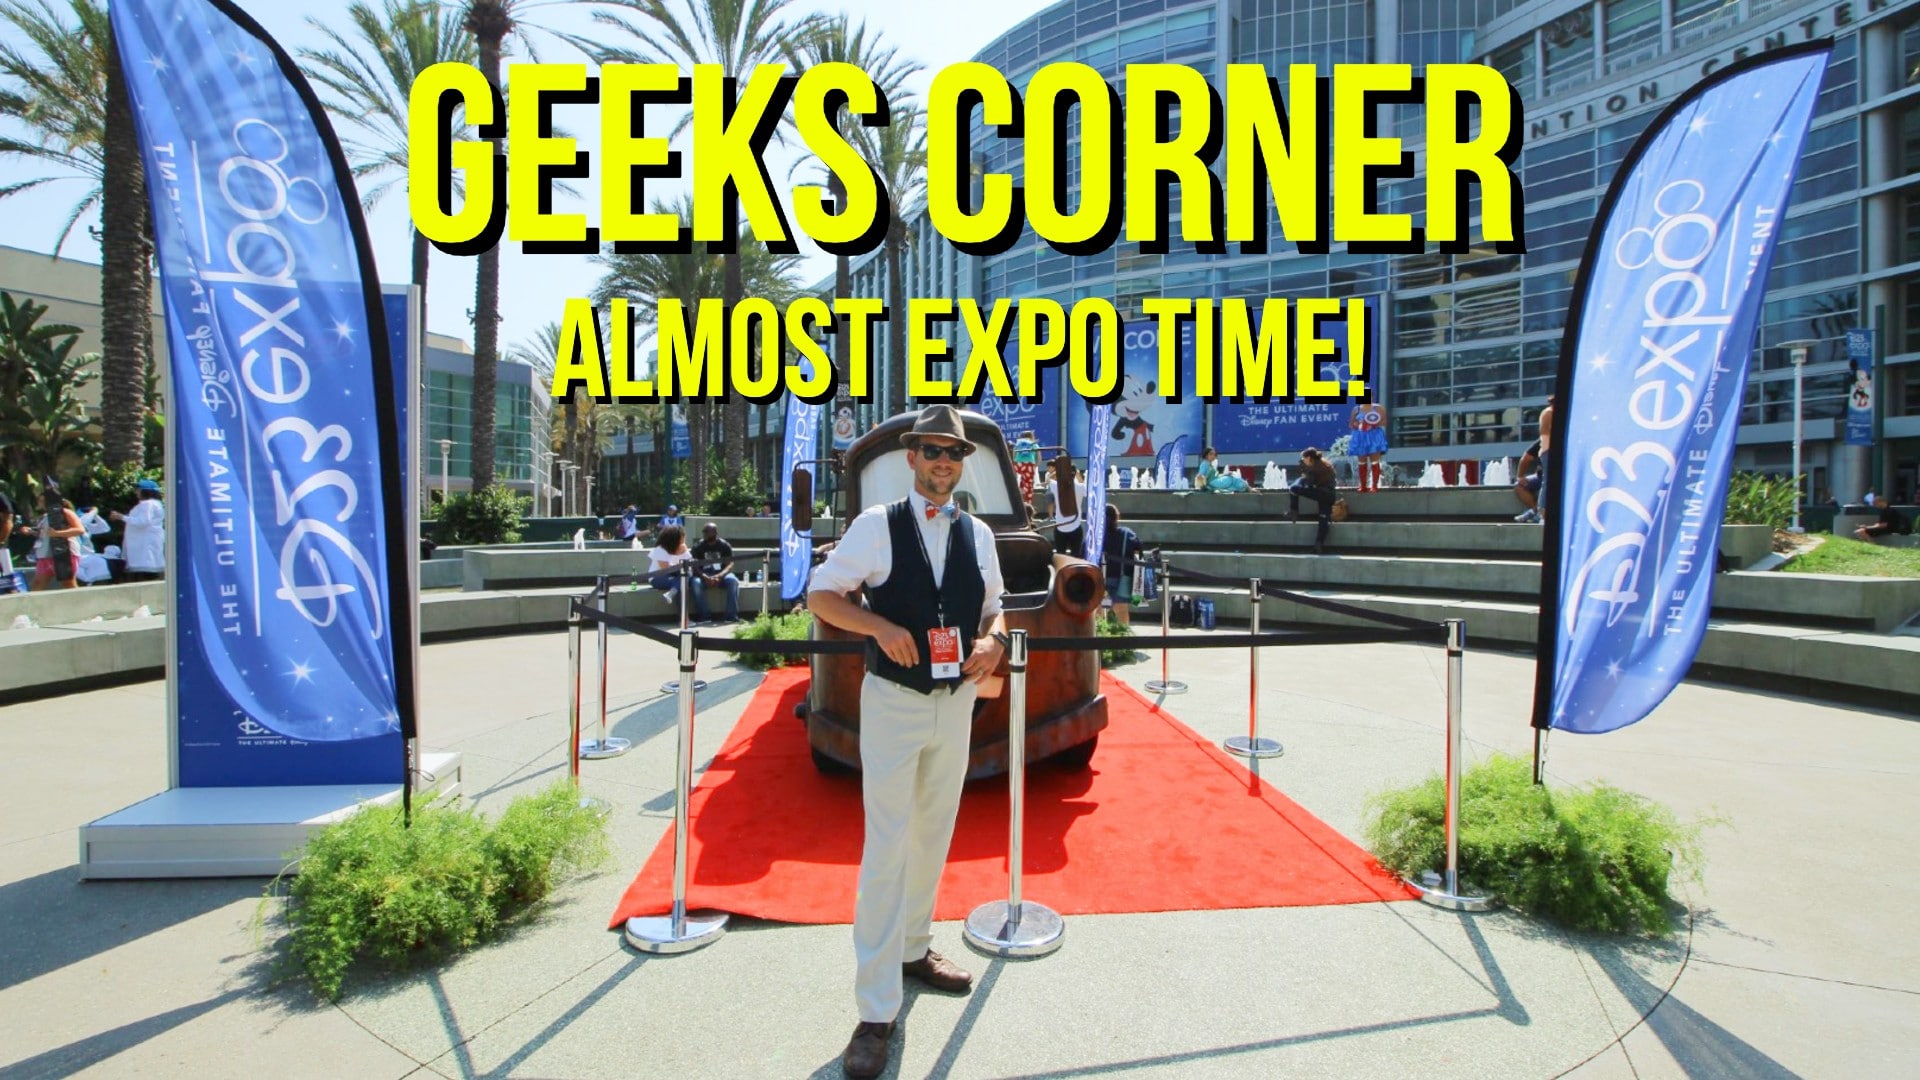 Almost Expo Time! - GEEKS CORNER - Episode 947 (#465)